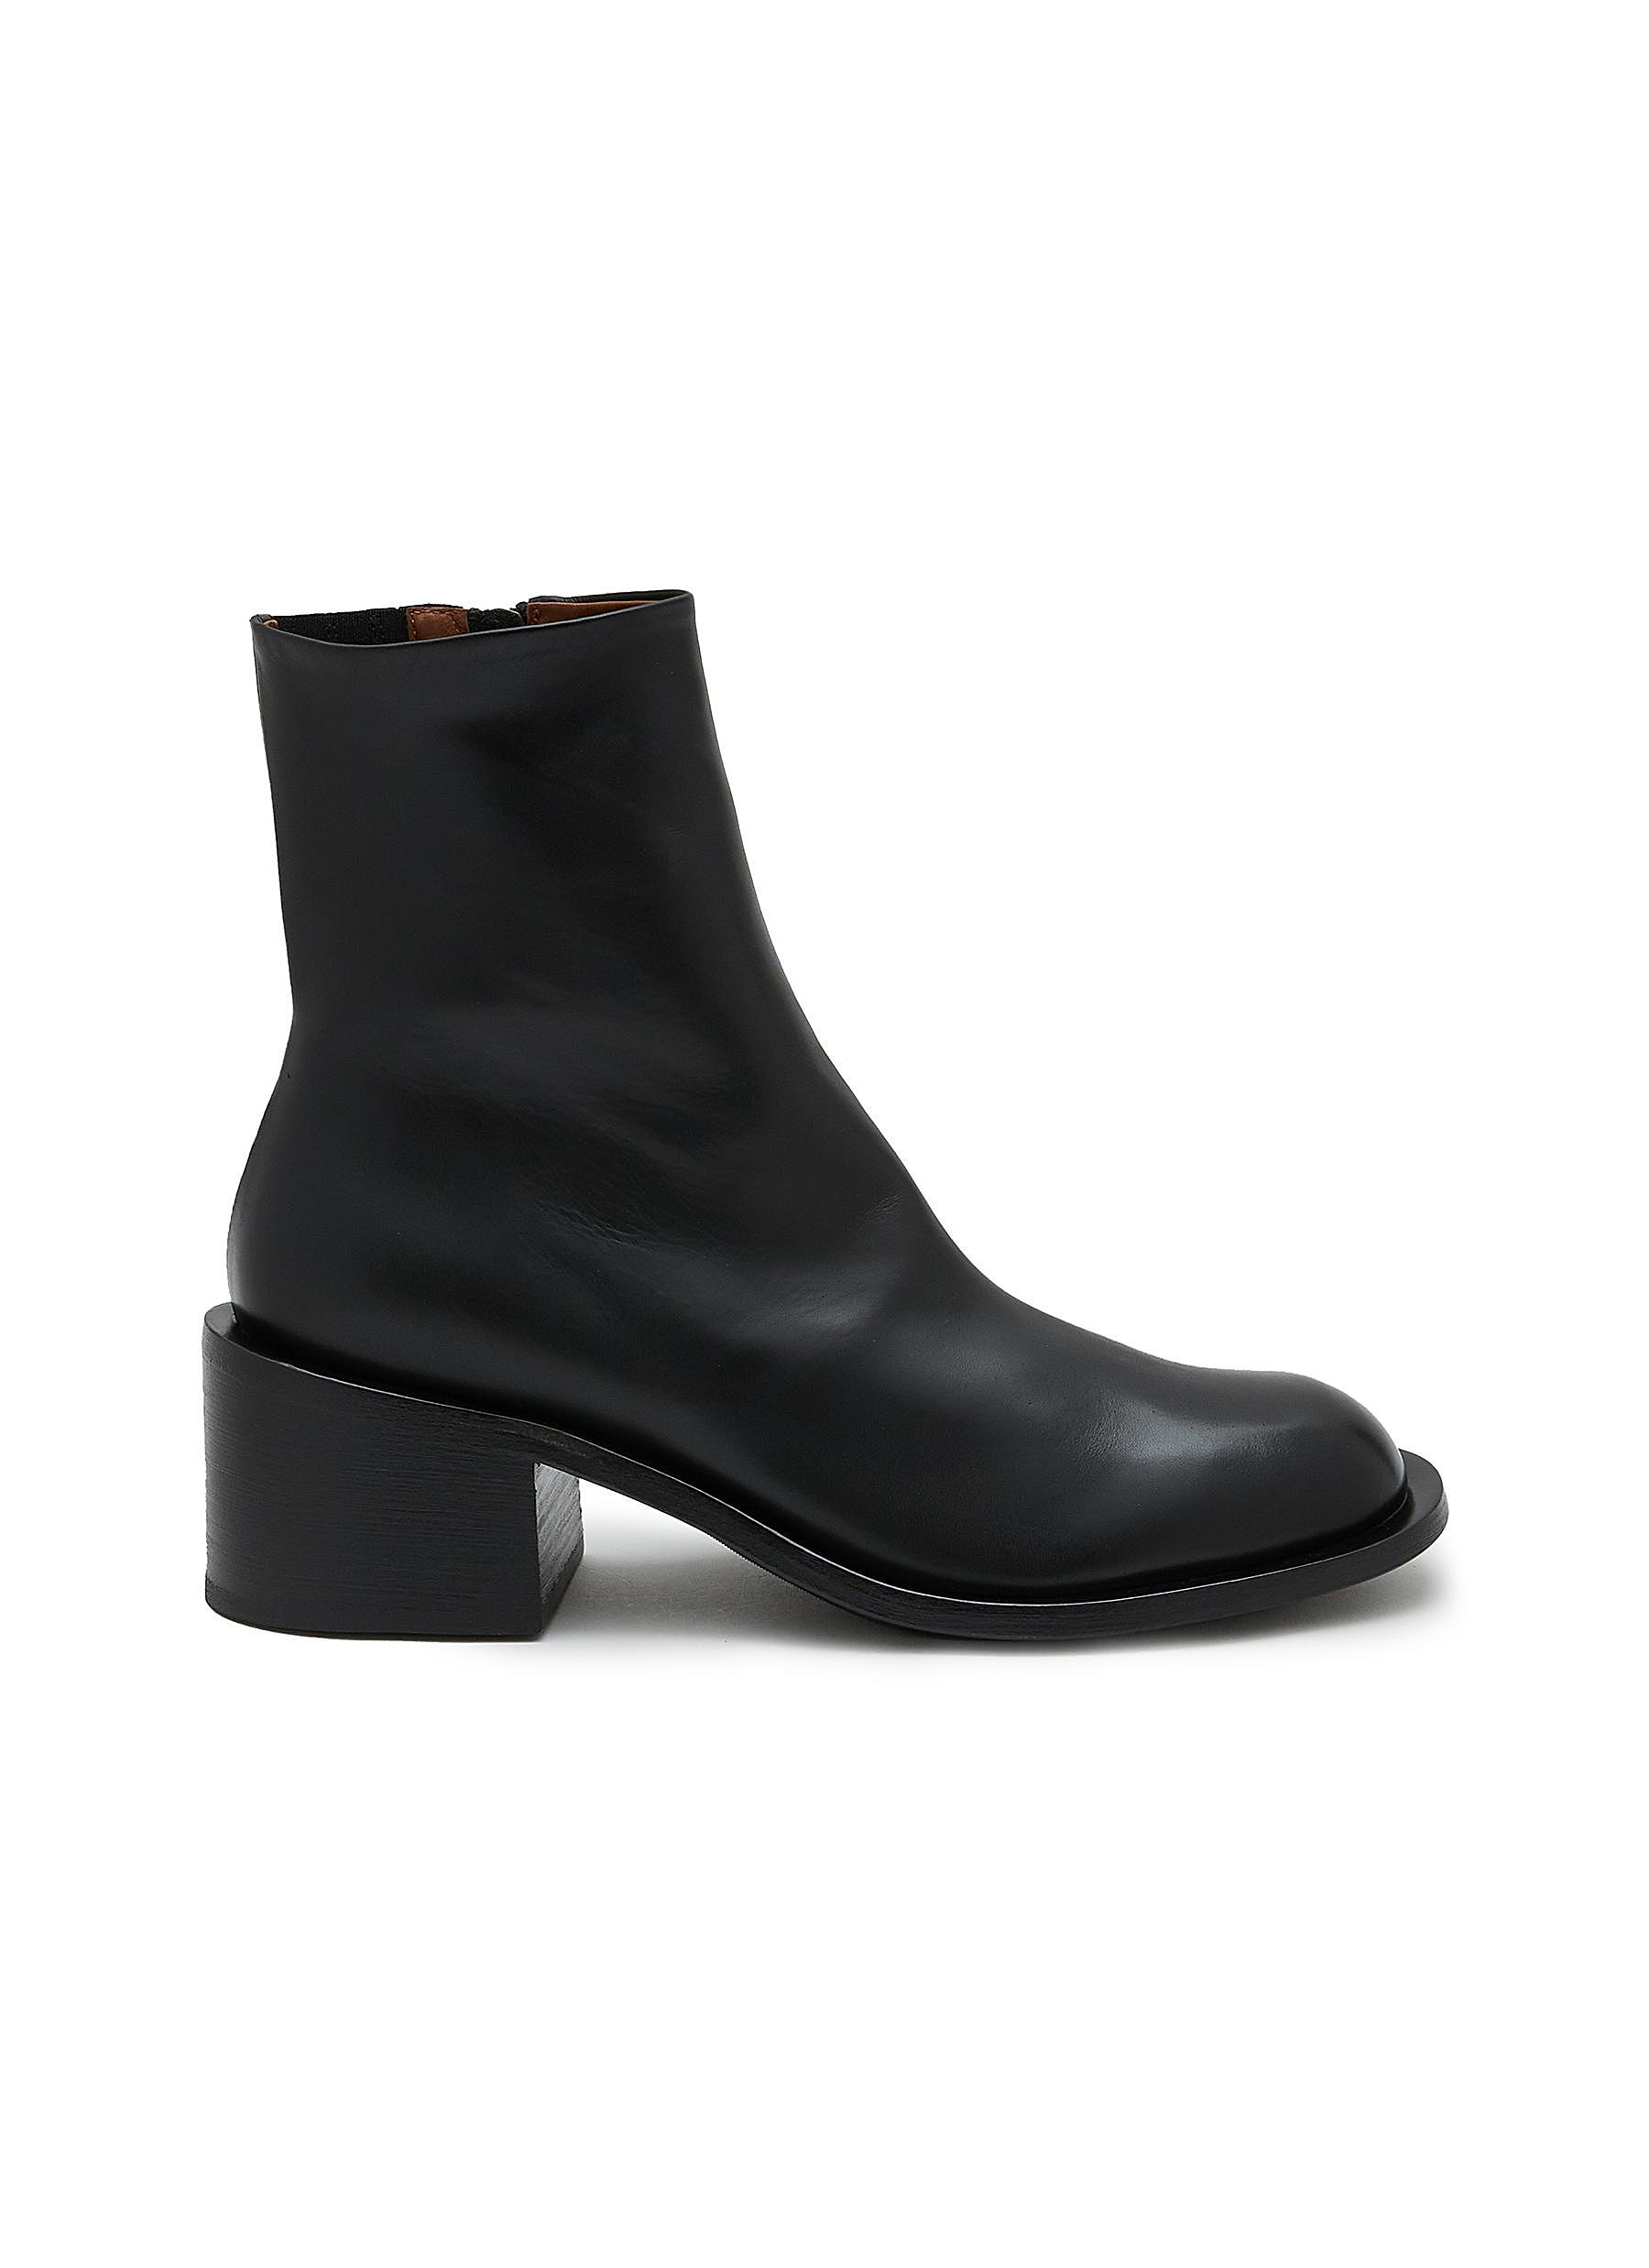 Allucino 60 Leather Ankle Boots